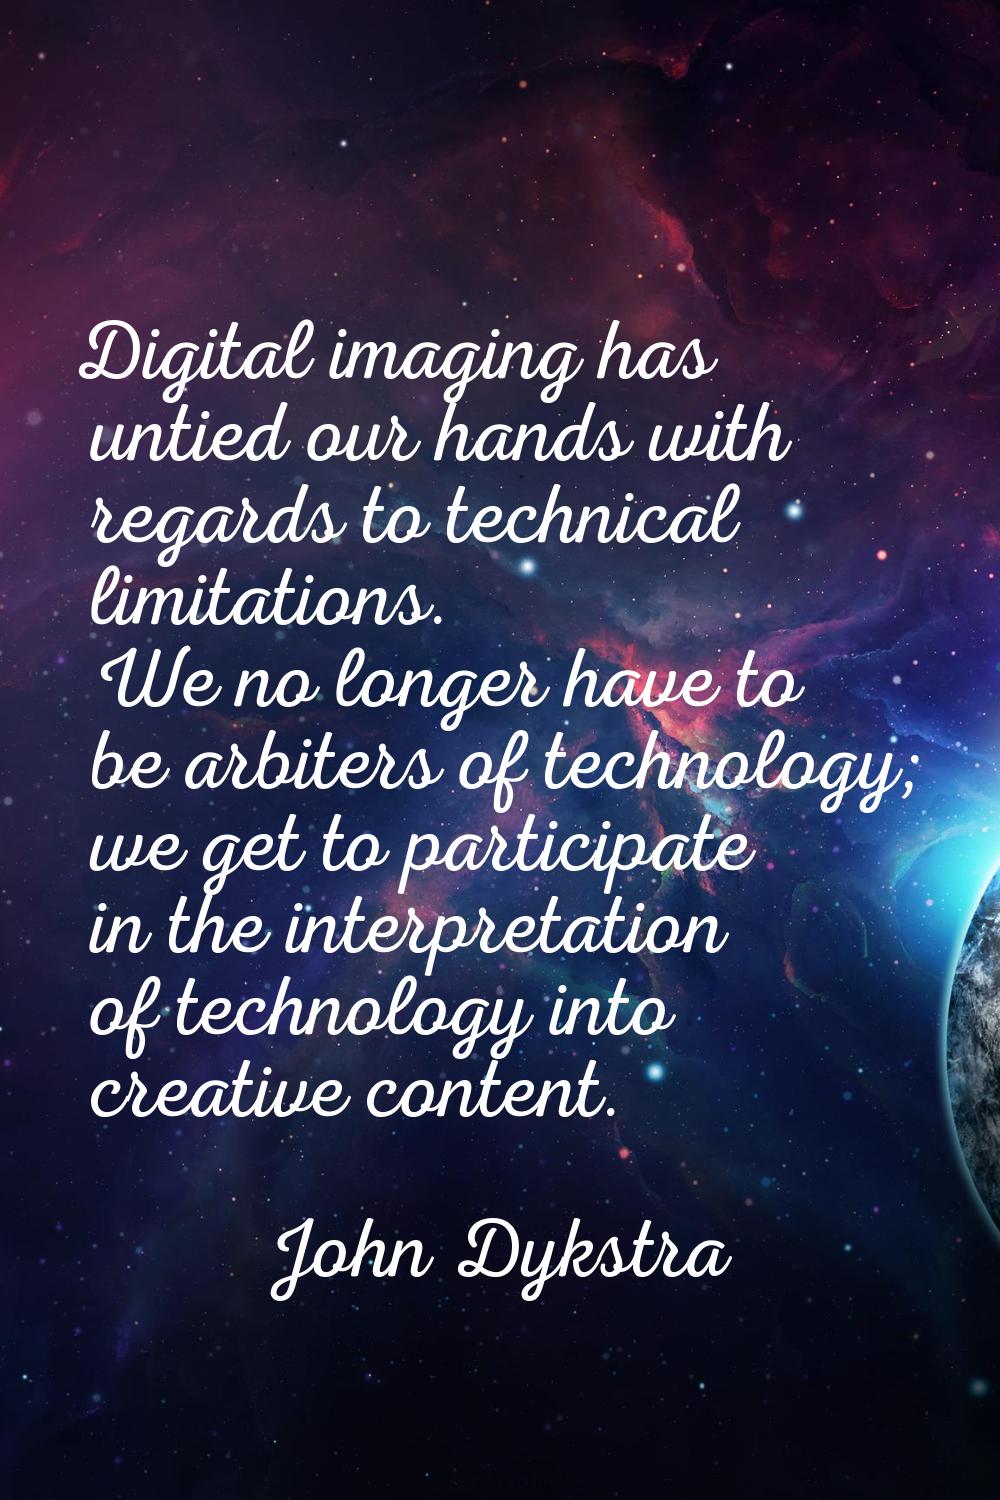 Digital imaging has untied our hands with regards to technical limitations. We no longer have to be